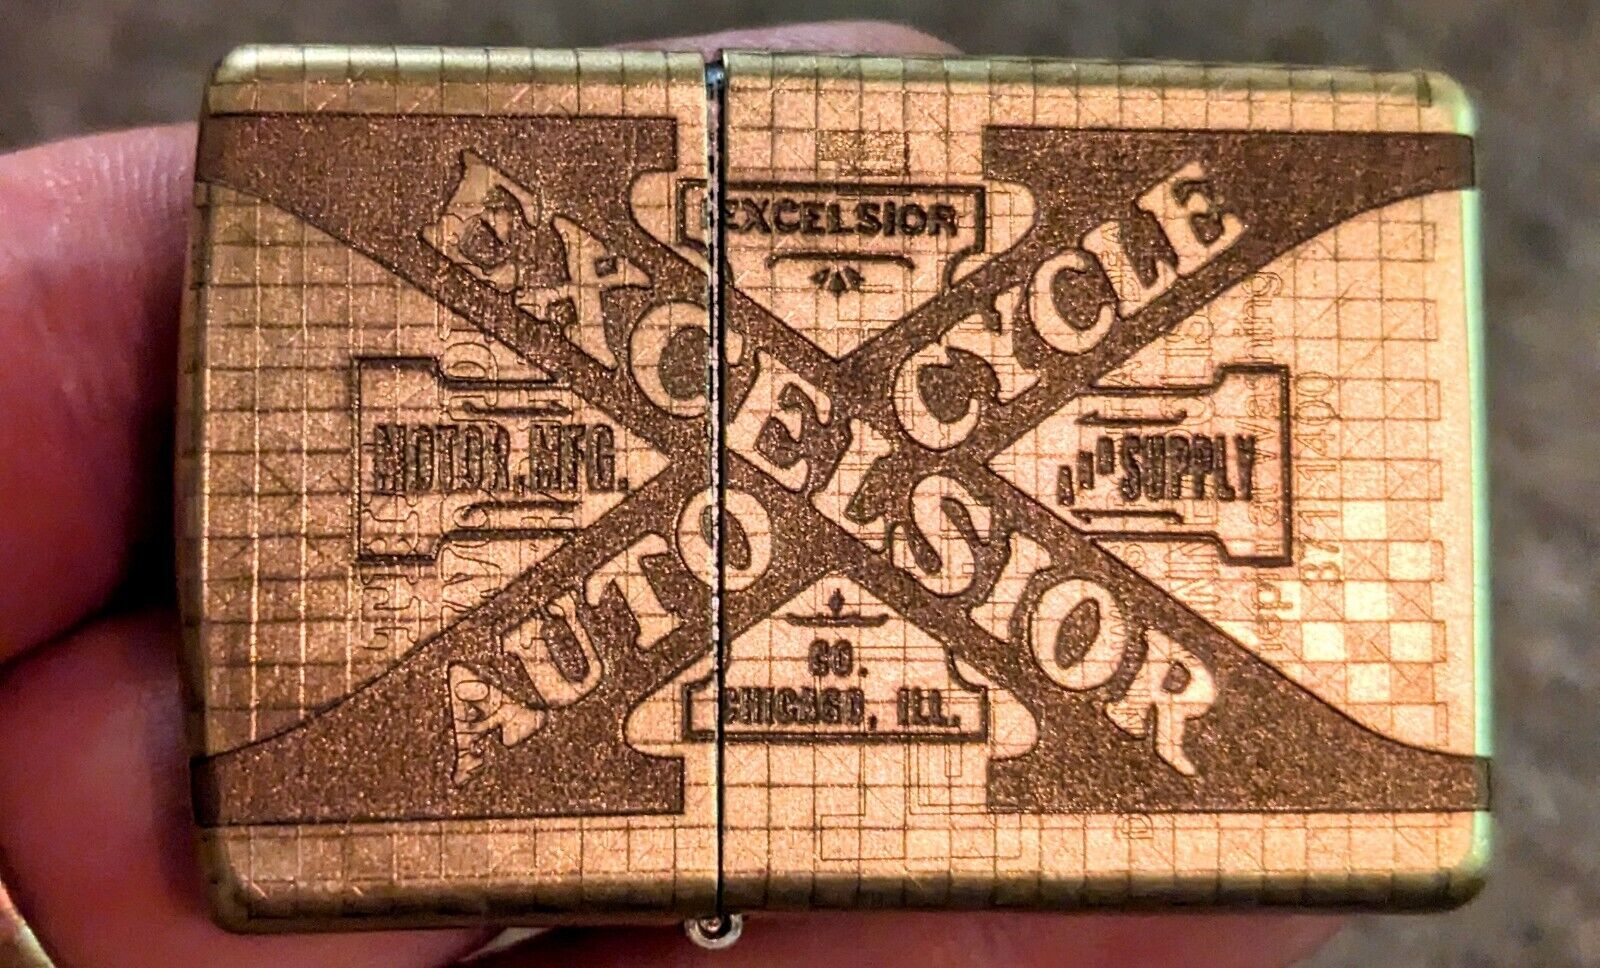 Excelsior Auto Cycle All Brass Zippo Lighter -classic Motorcycle Cool.  